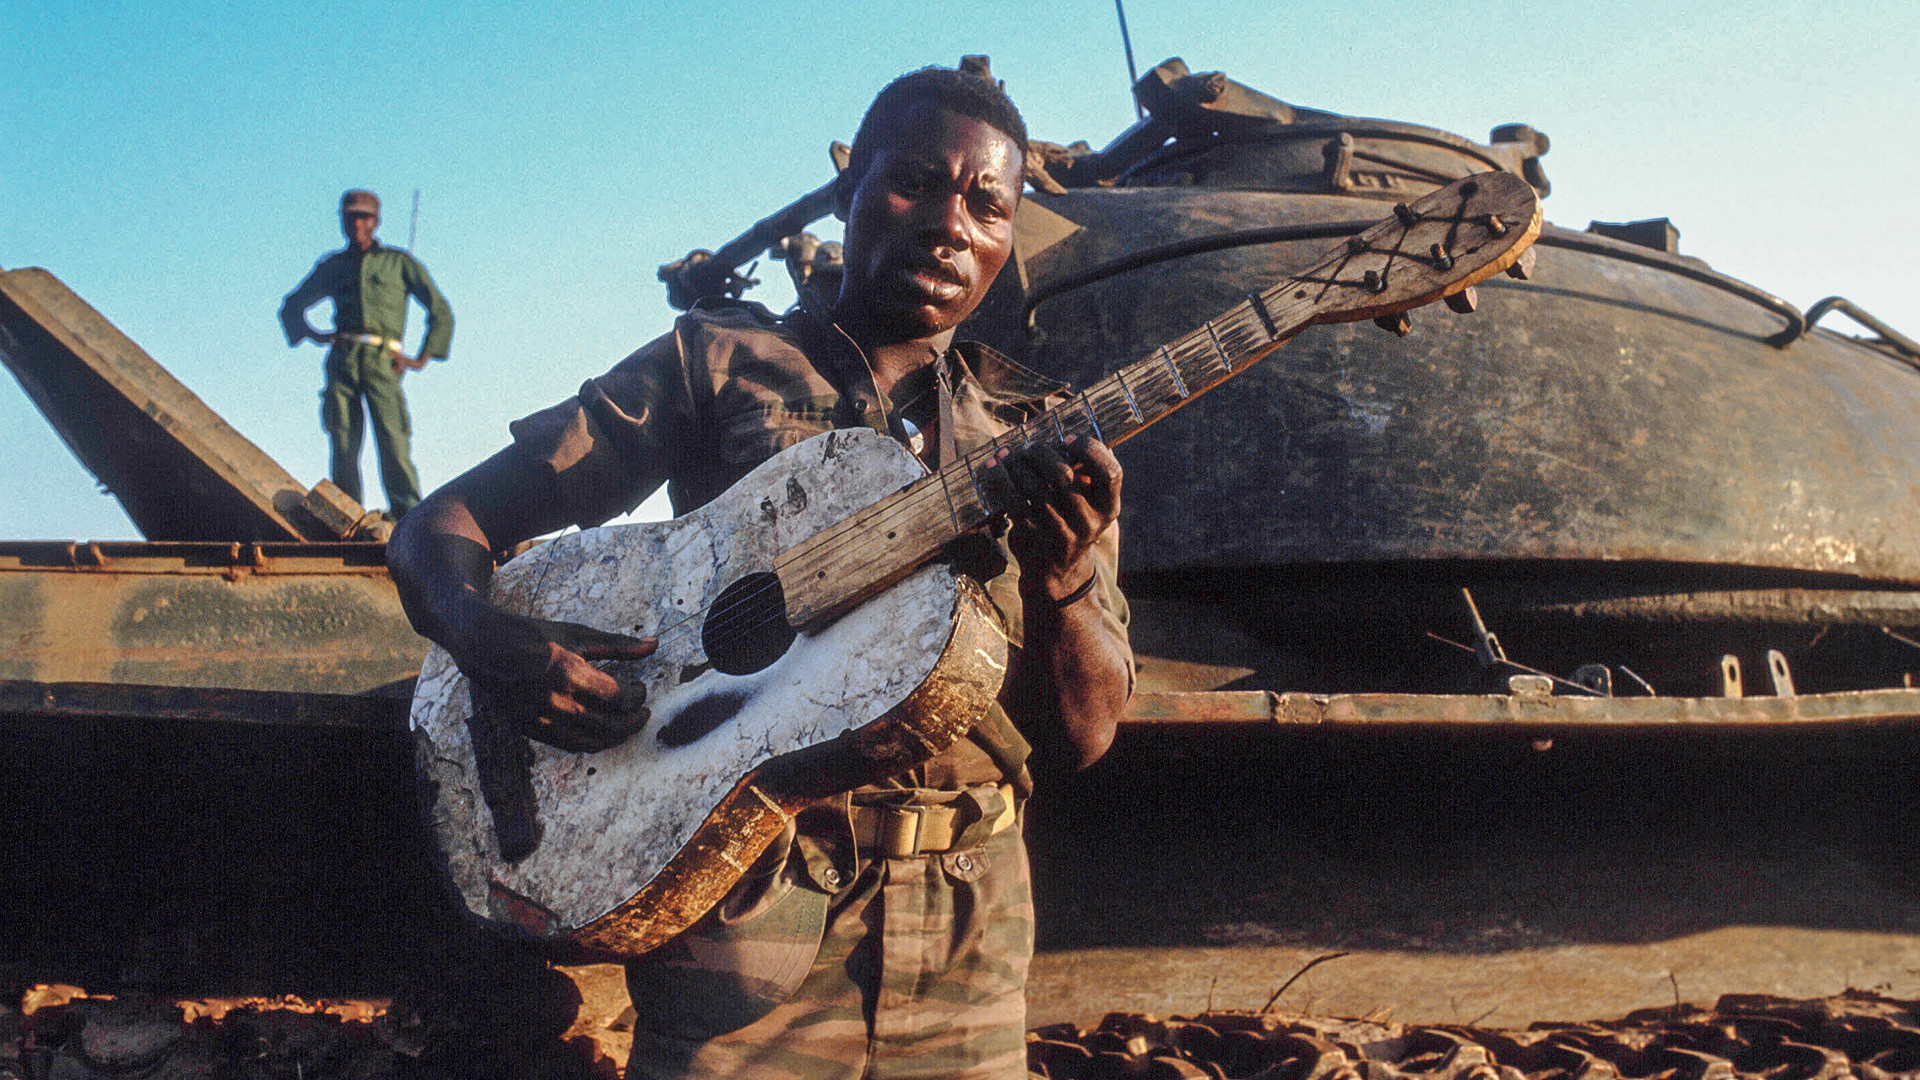 An African soldier against the background of a Soviet T-34 tank.